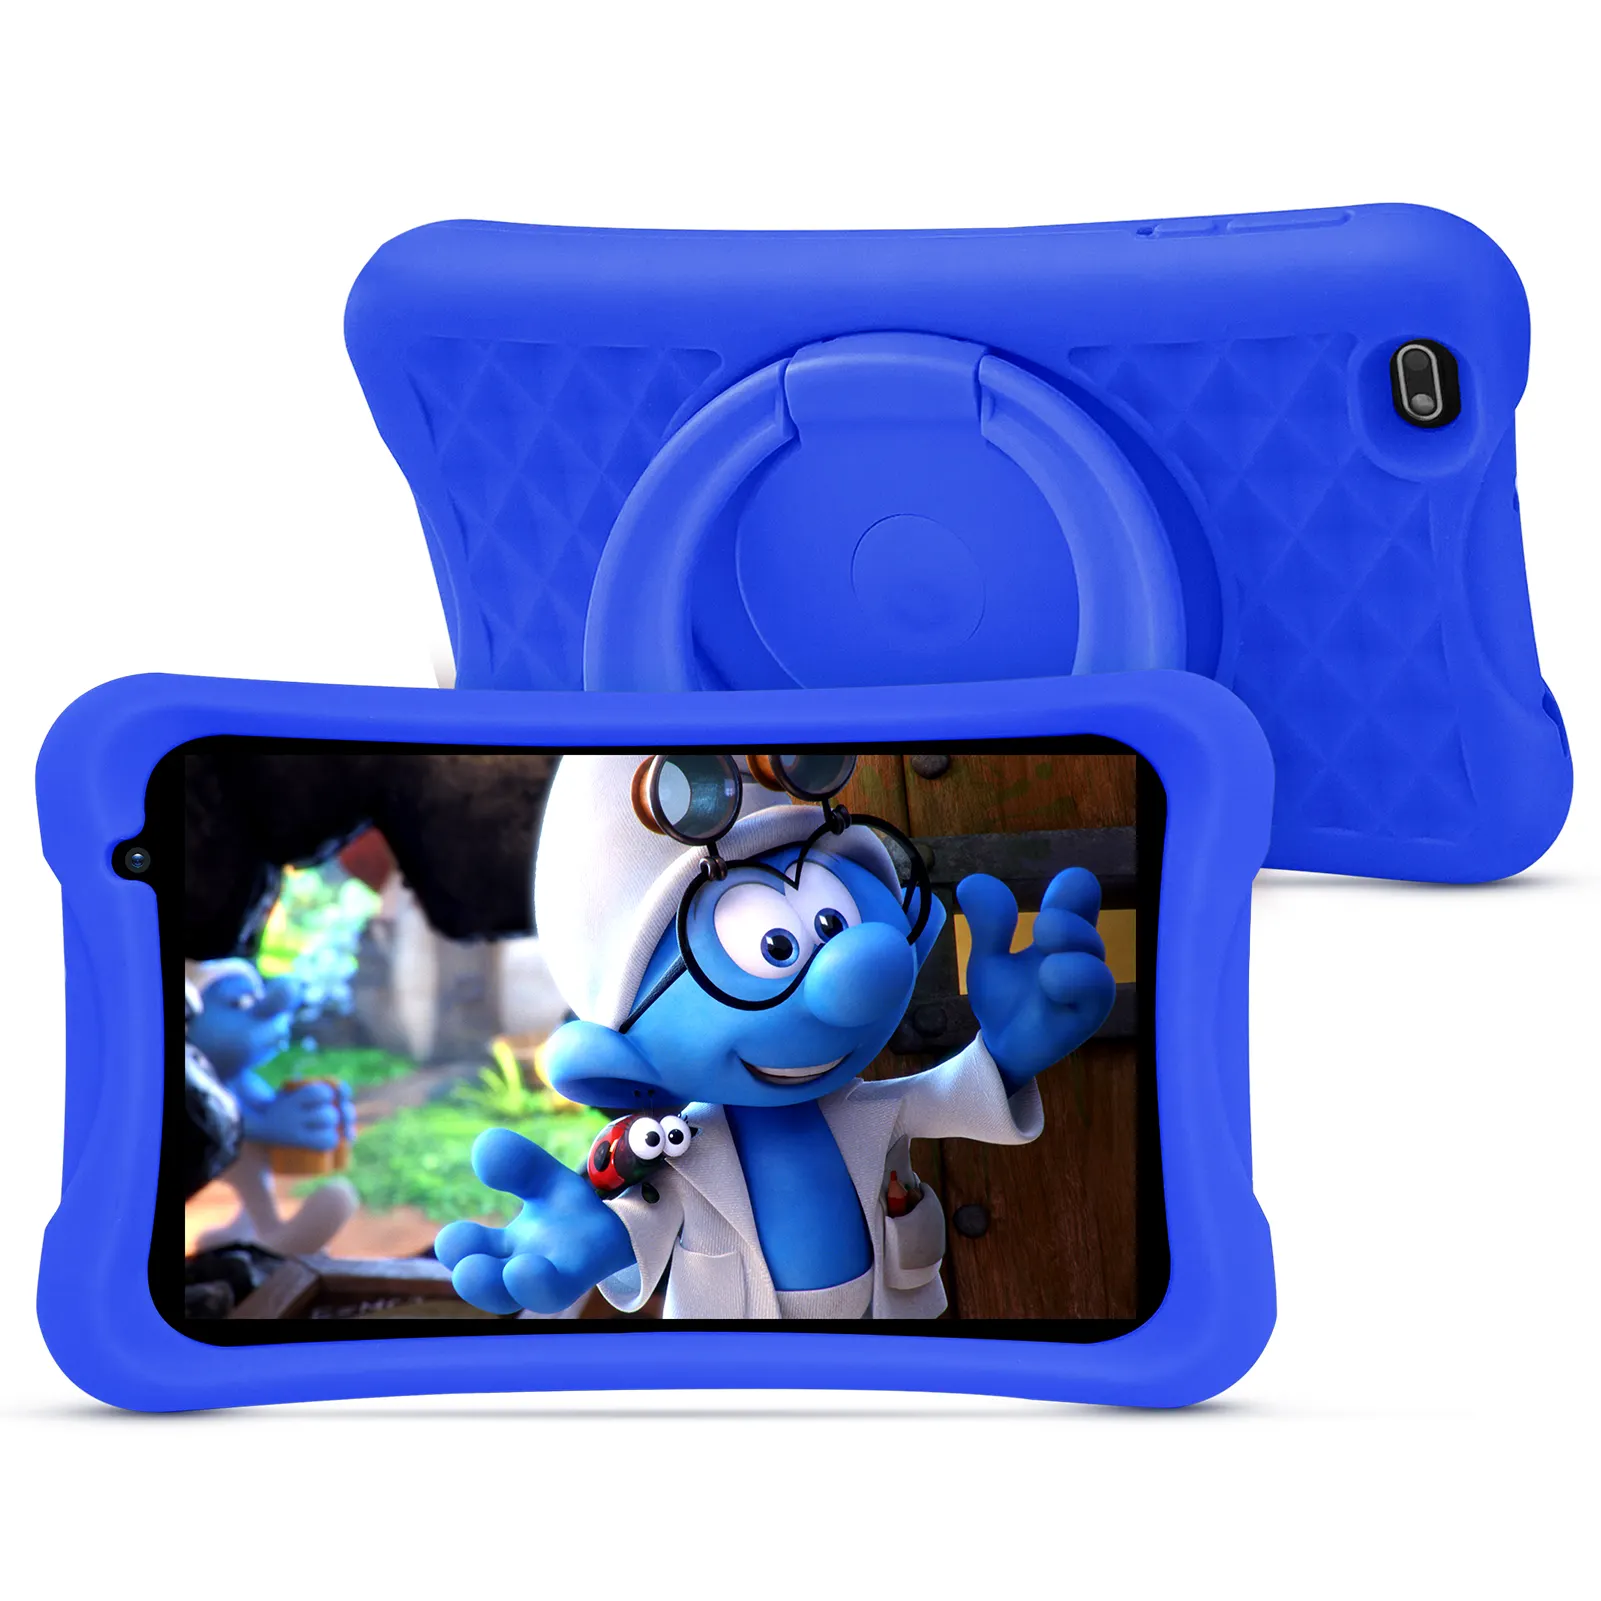 PRITOM L8K Unisoc SC7731E Quad Core Tablet Learning Educational For Children 8 Inch Android 10 Kids Tablet Pc